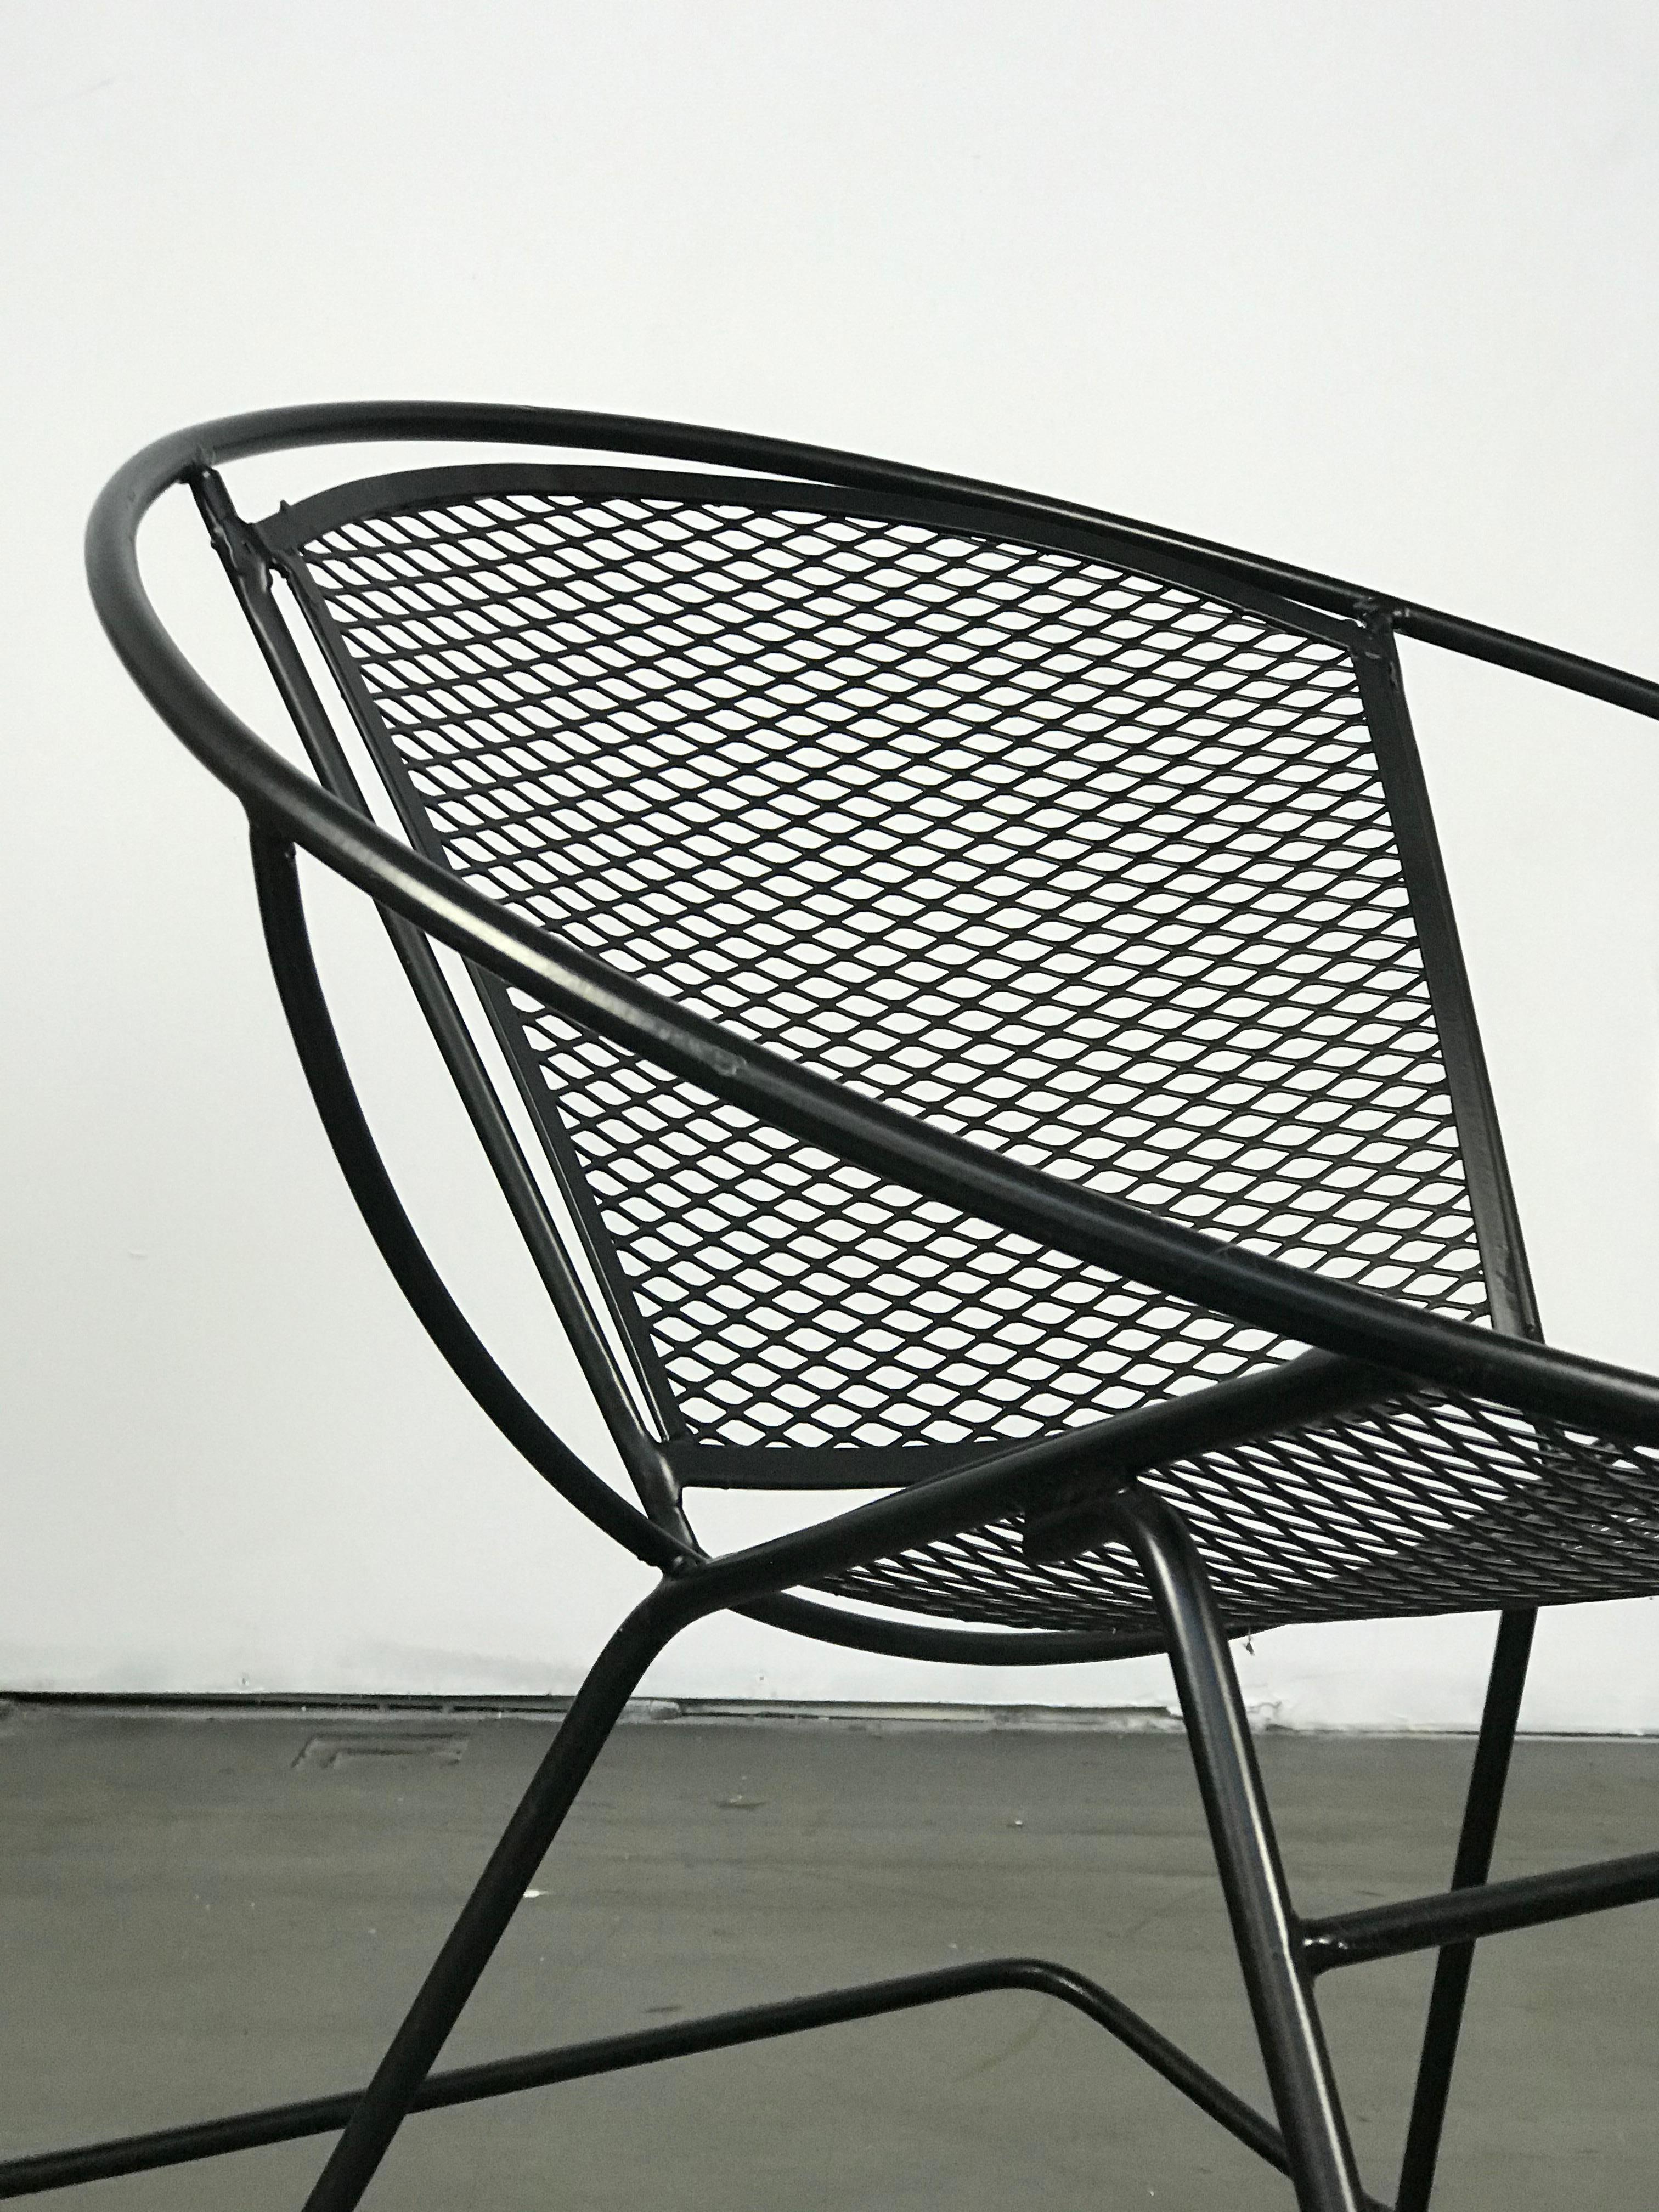 Mid-20th Century Excellent 1950s Modernist Iron Hoop Radial Patio Rocking Chair by Salterini